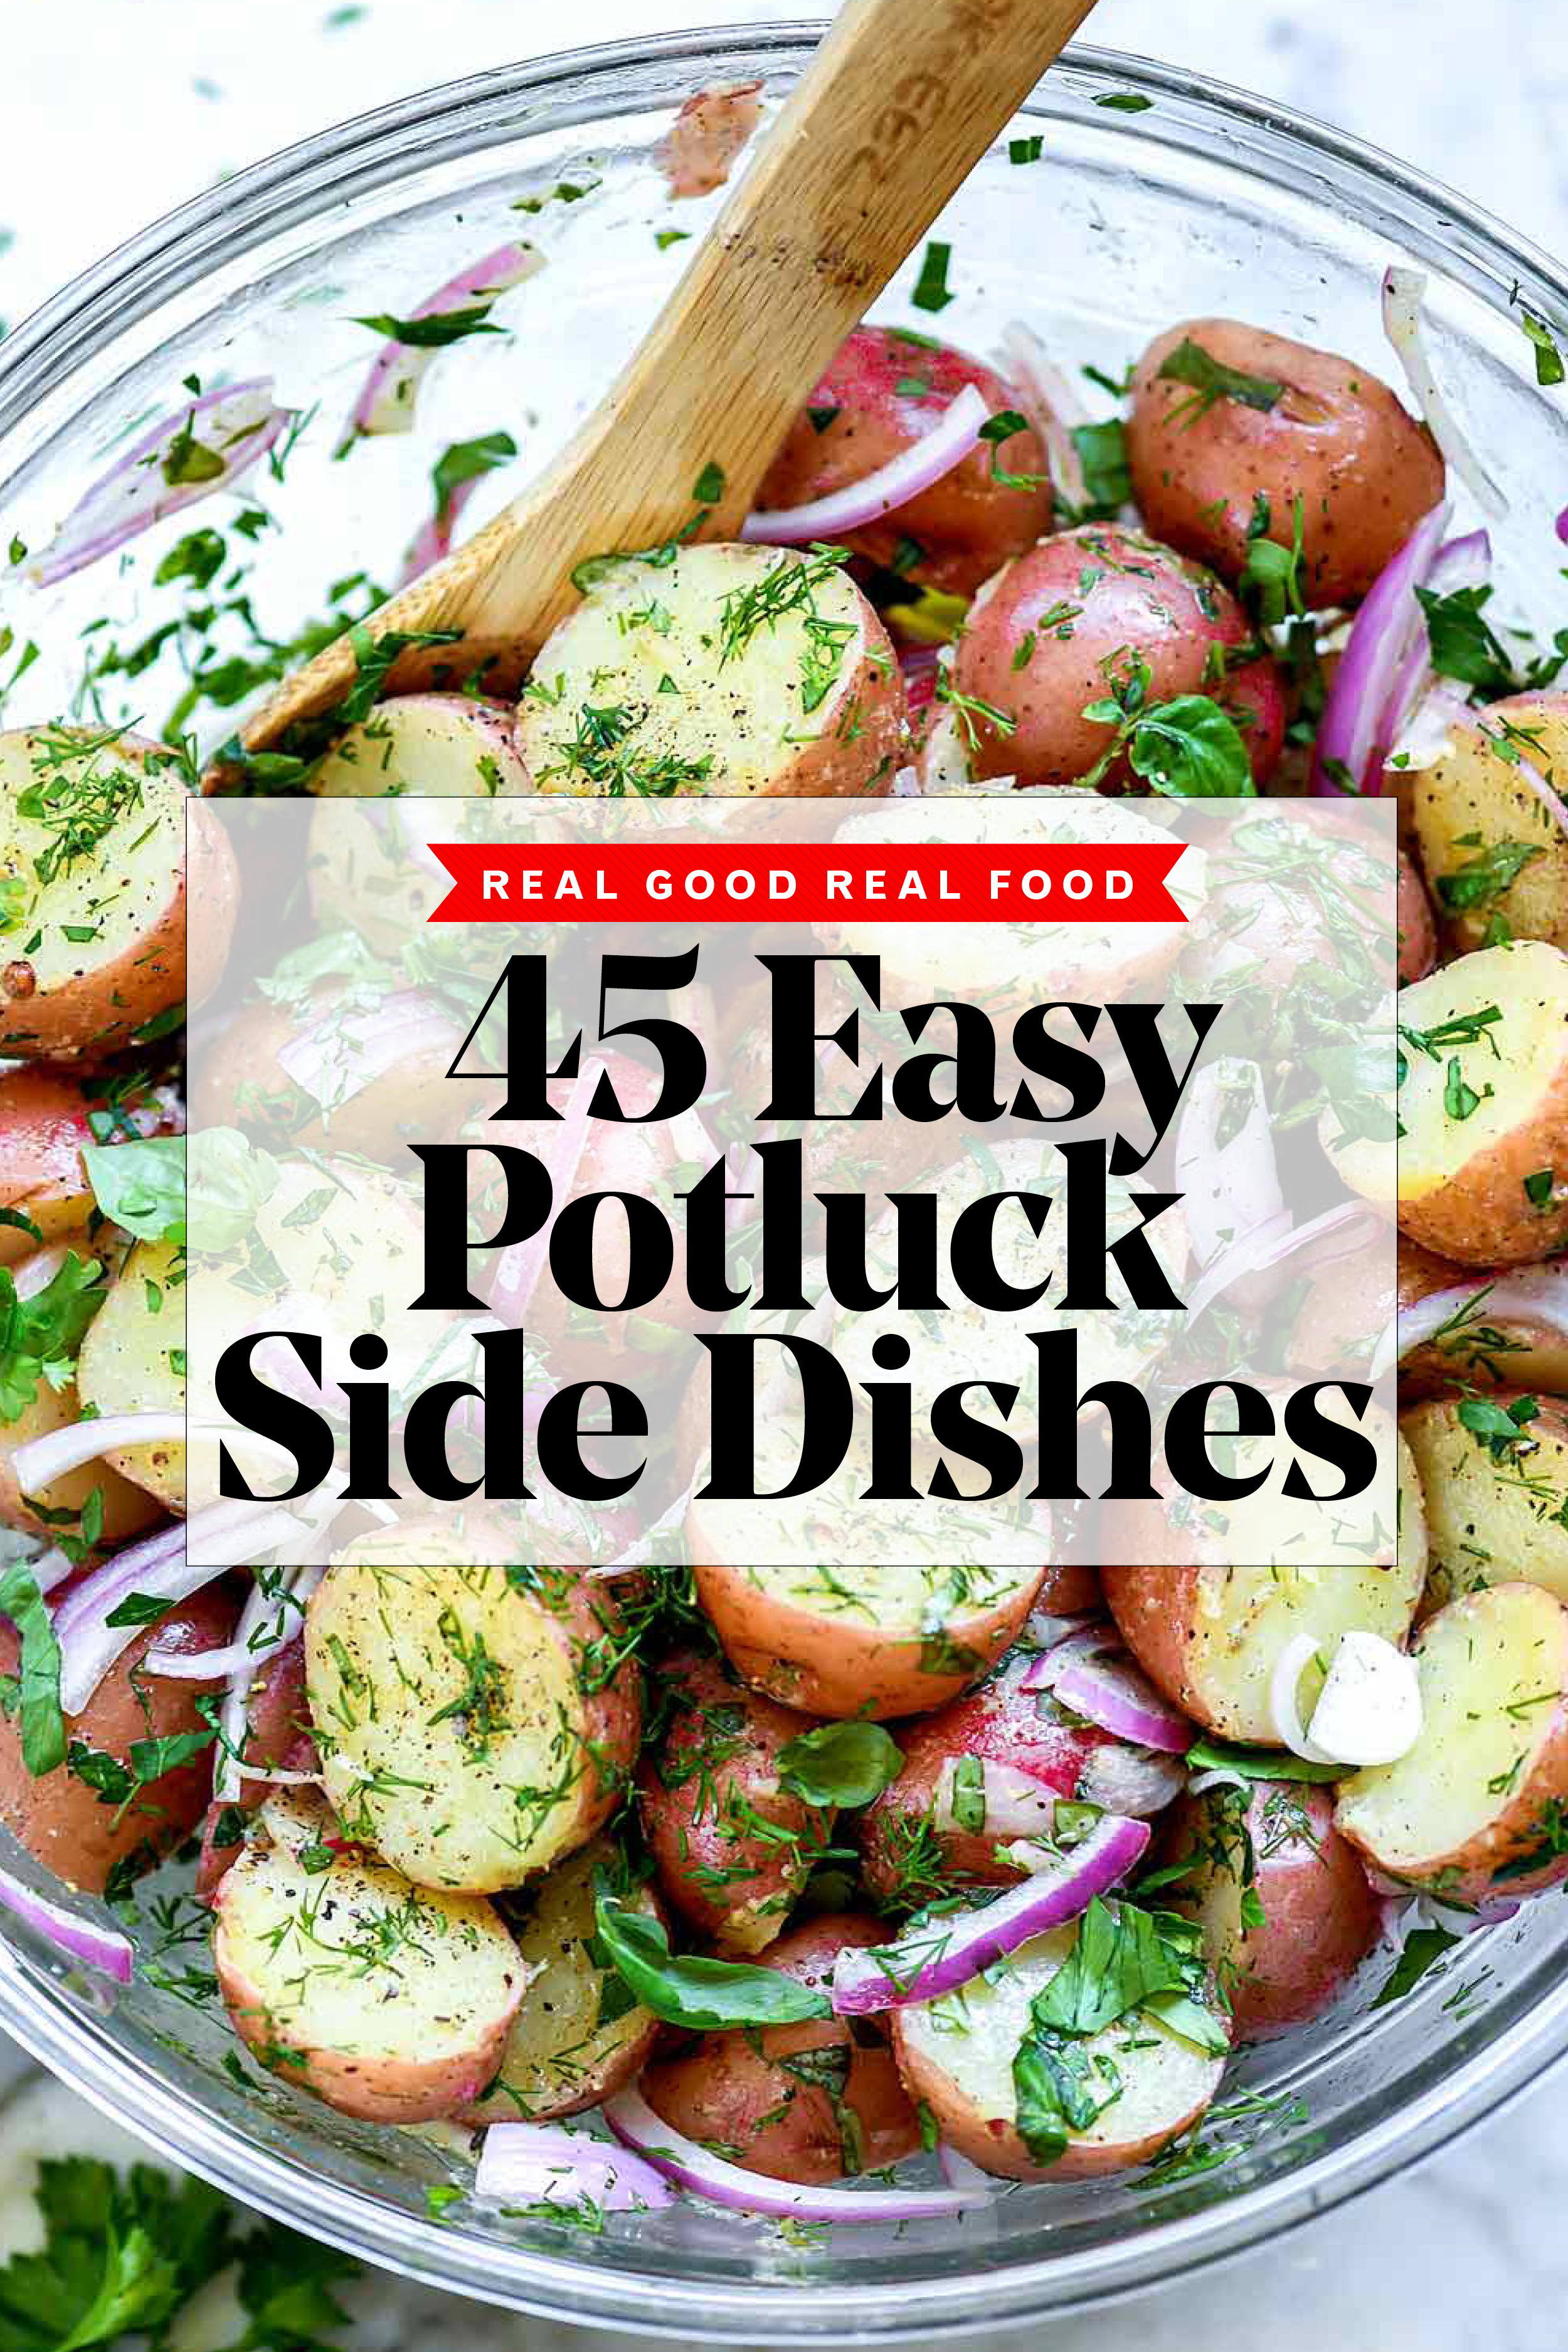 45 Easy Potluck Side Dishes foodiecrush.com